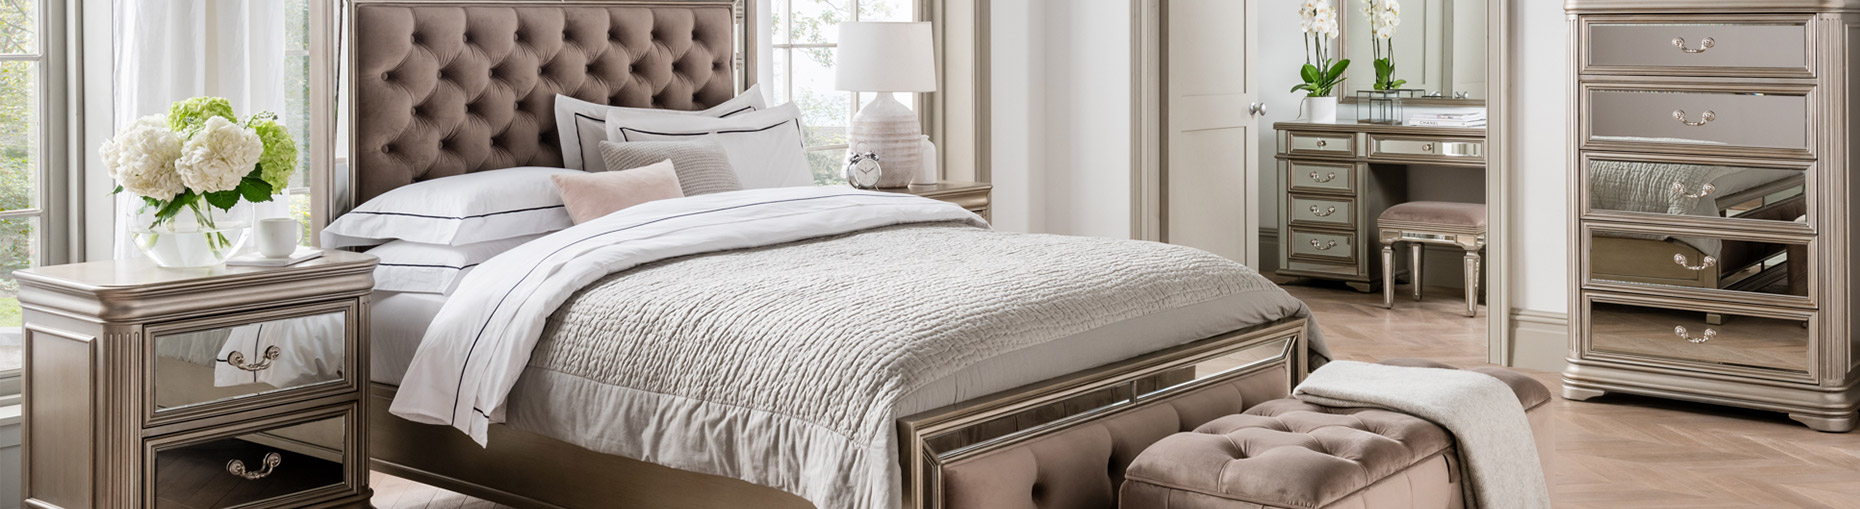 Madison bedroom Collection at Forrest Furnishing